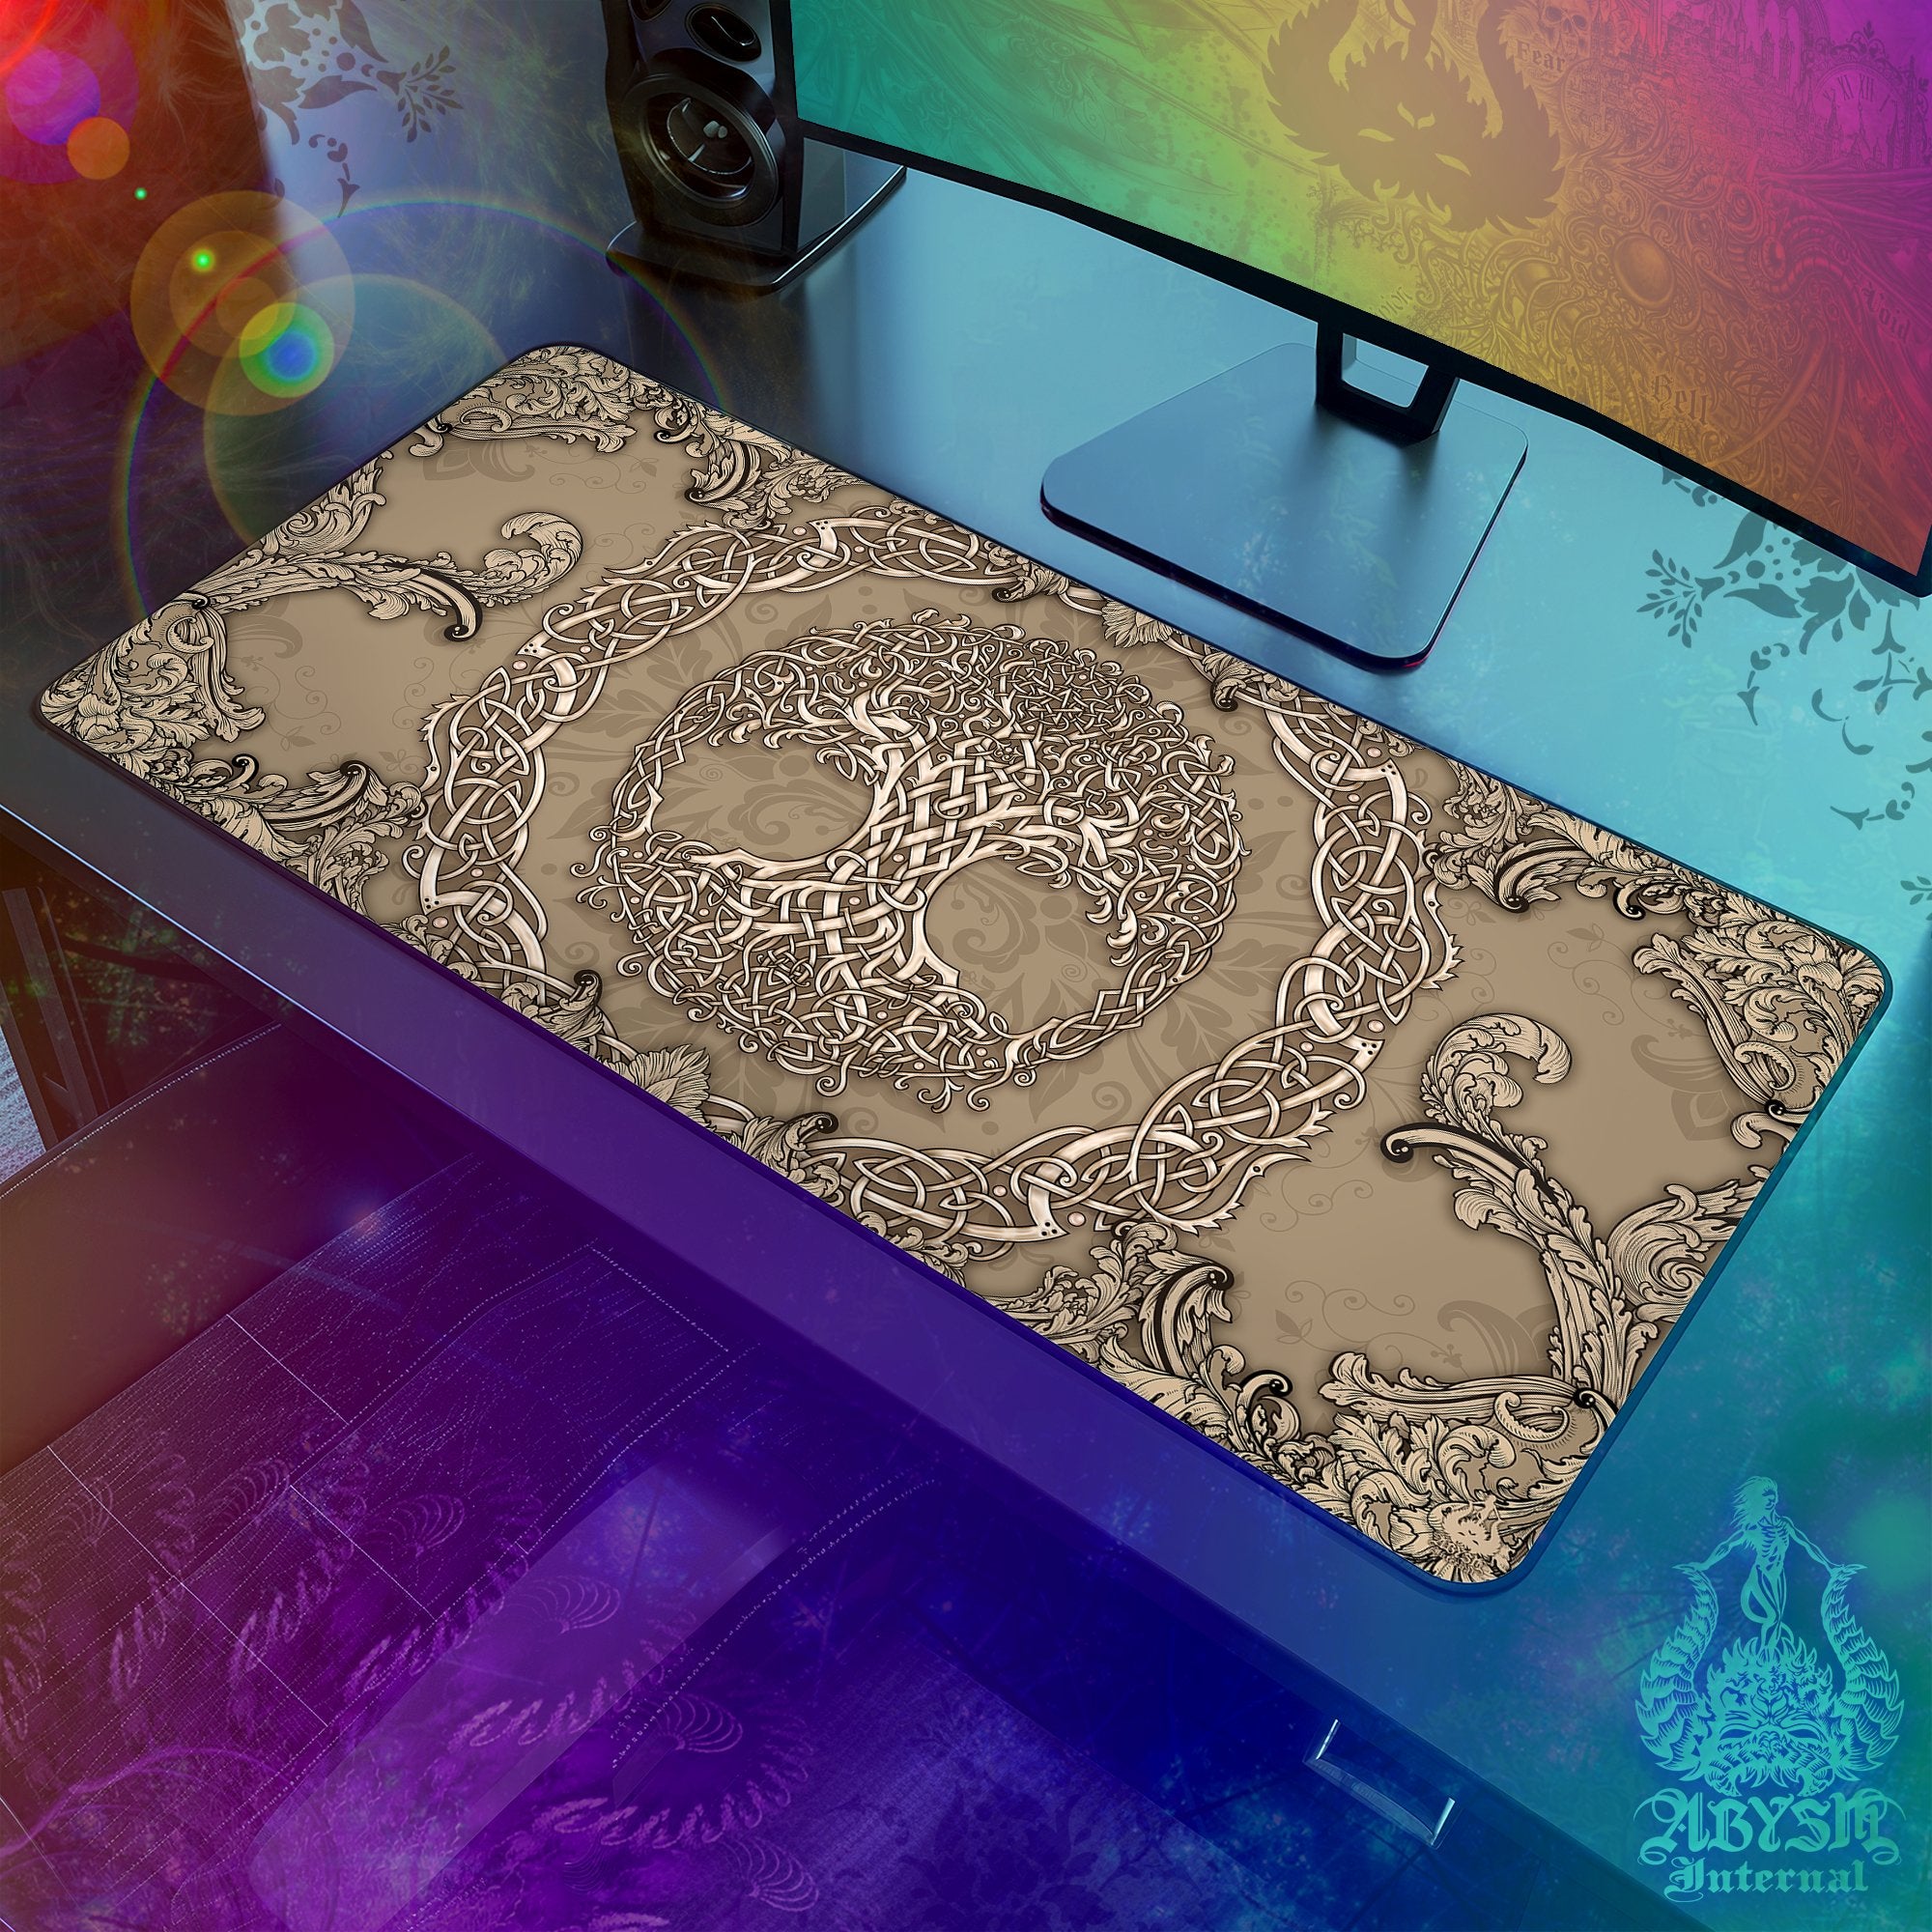 Tree of Life Gaming Desk Mat, Celtic Knotwork Mouse Pad, Wicca Table Protector Cover, Indie Workpad, Indie Art Print - Cream - Abysm Internal